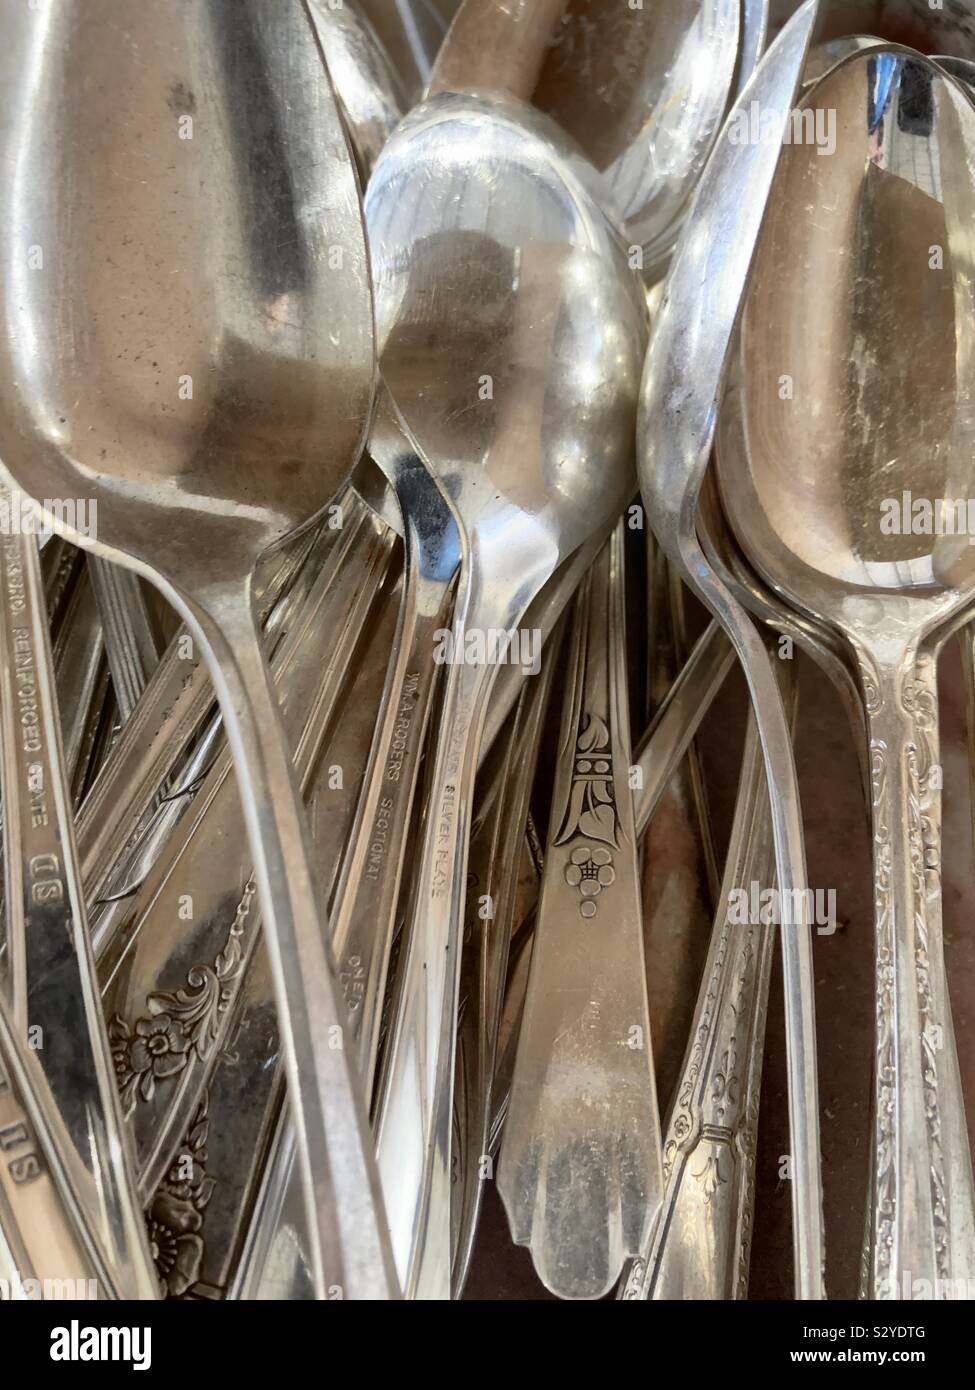 Silver Spoons Stock Photo